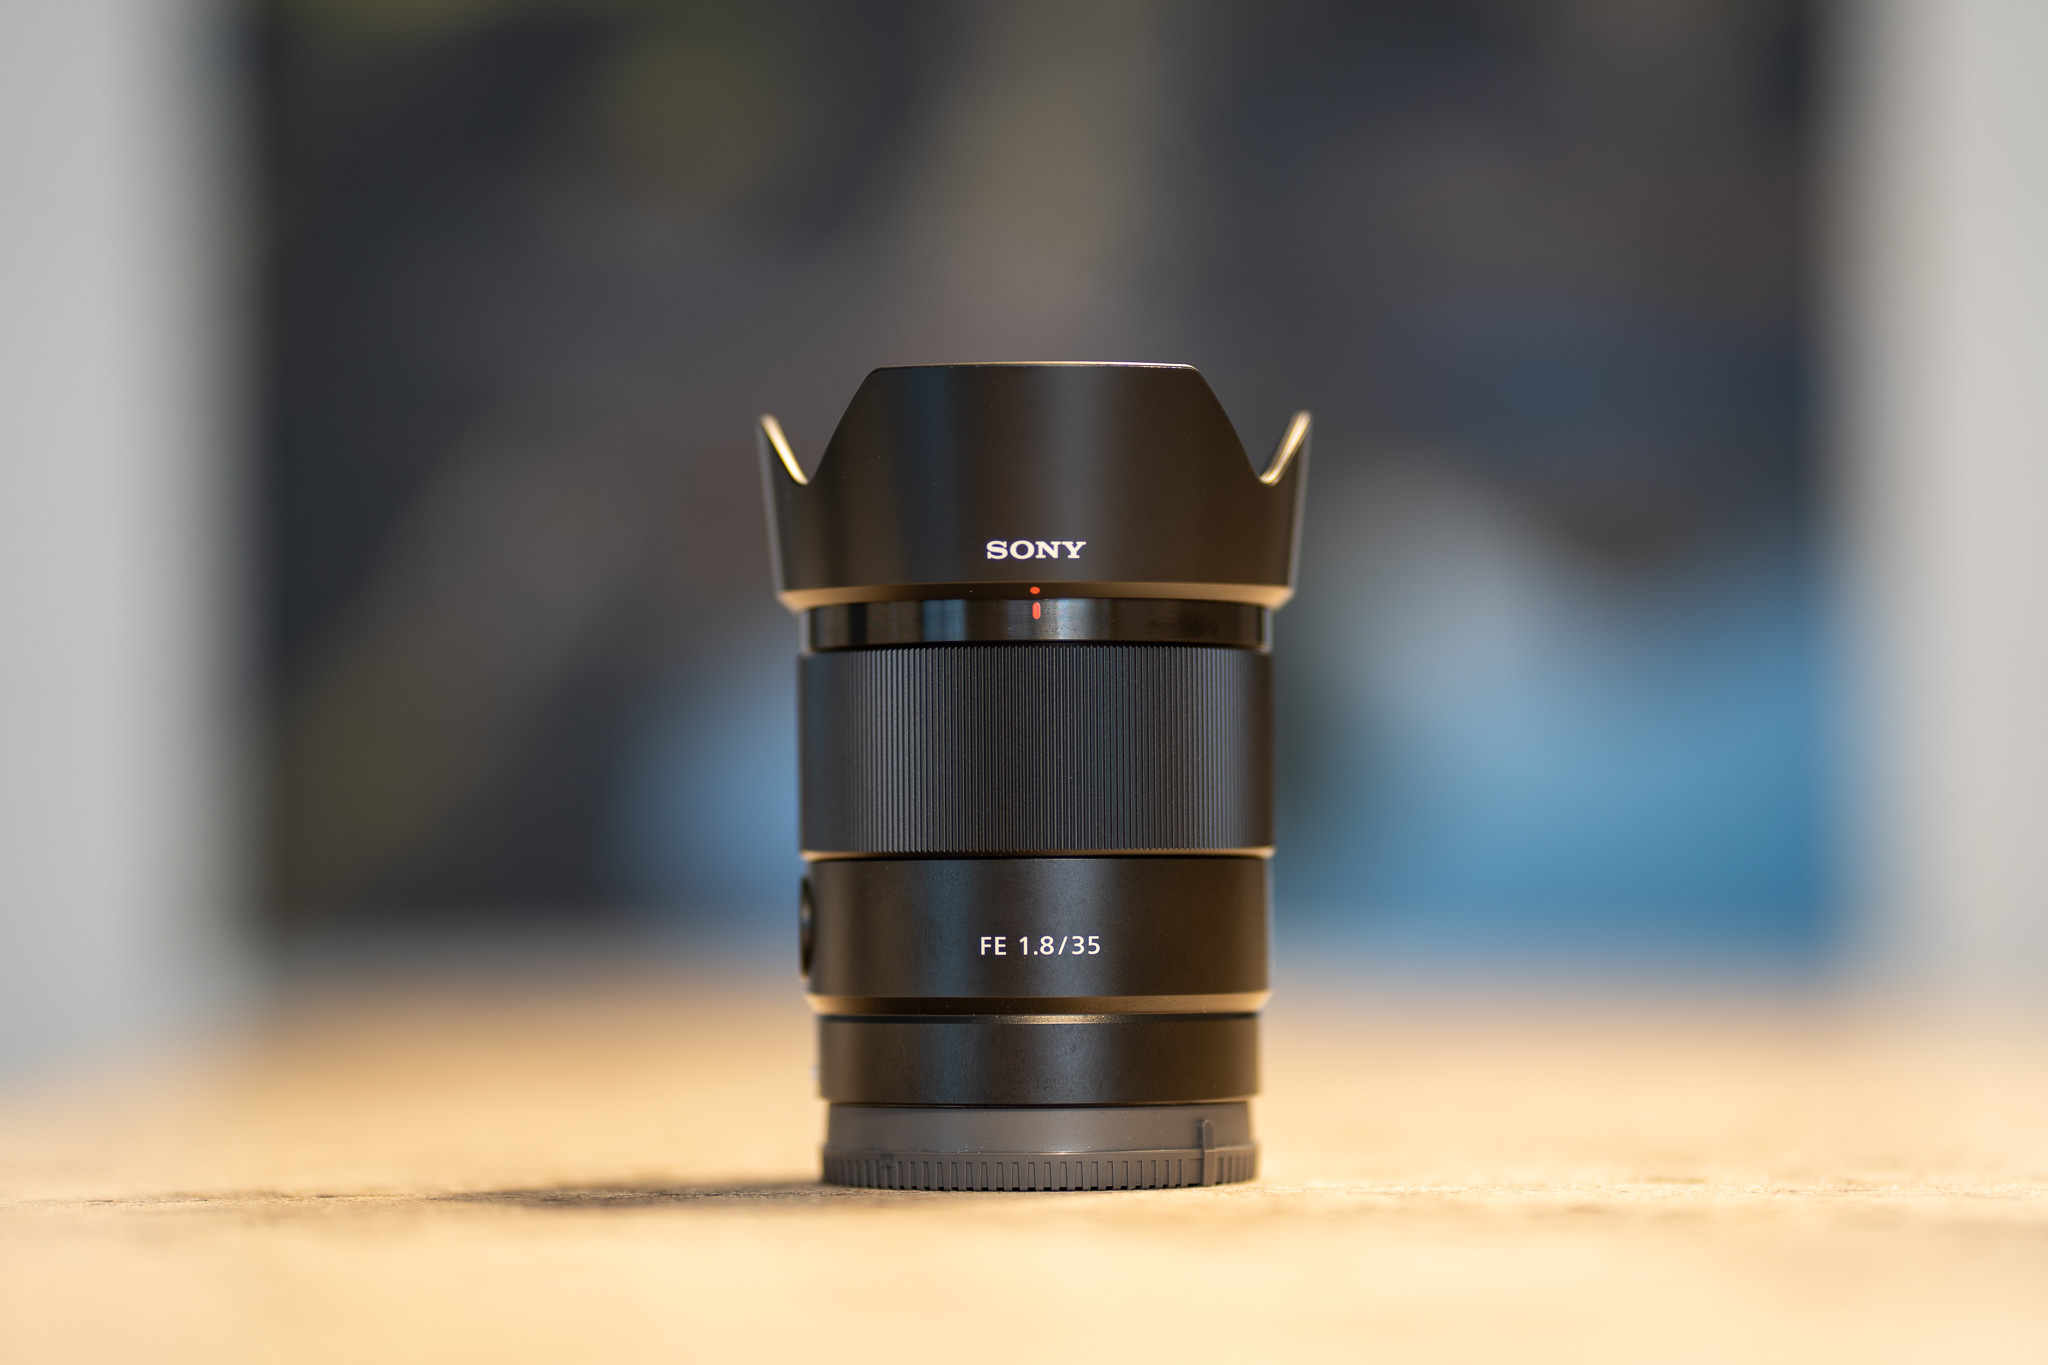 The Sony FE 1.8/35mm